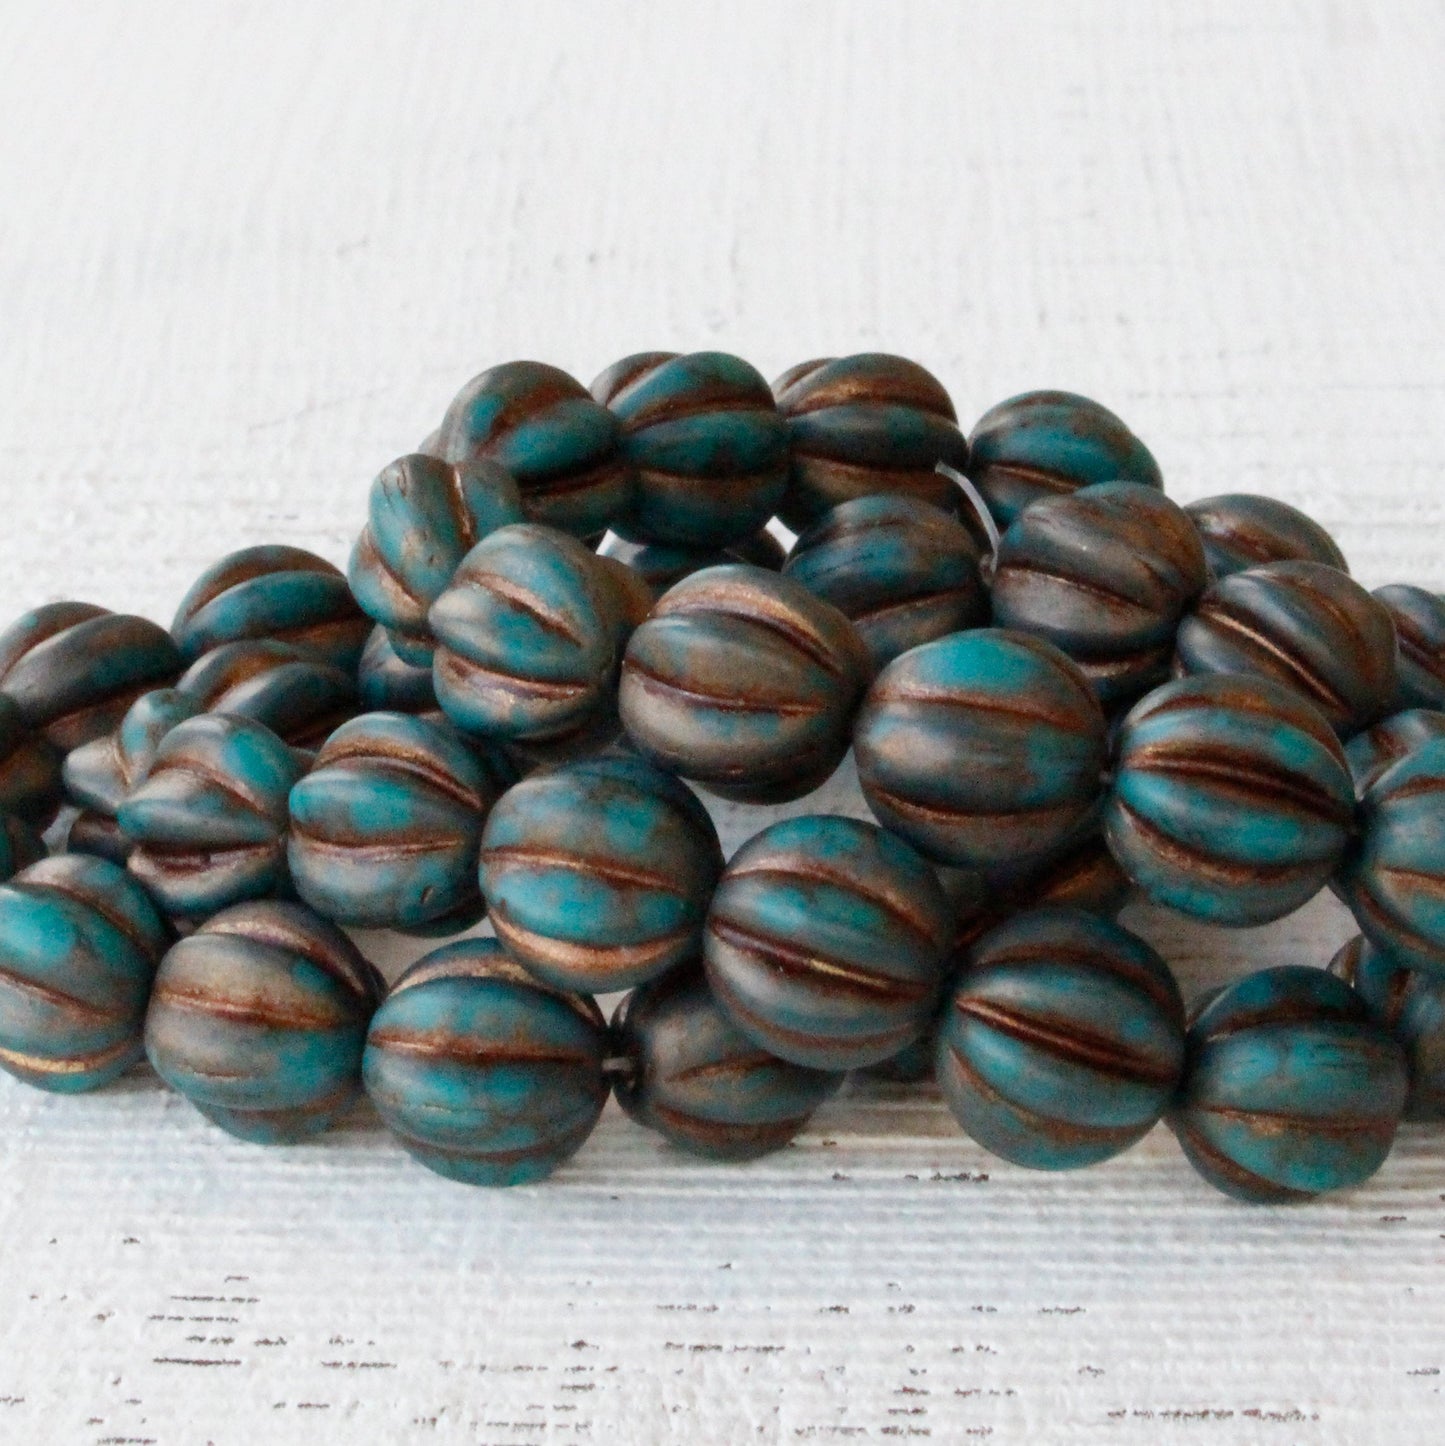 10mm Melon Beads - Matte Turquoise with Gold Wash - 15 Beads